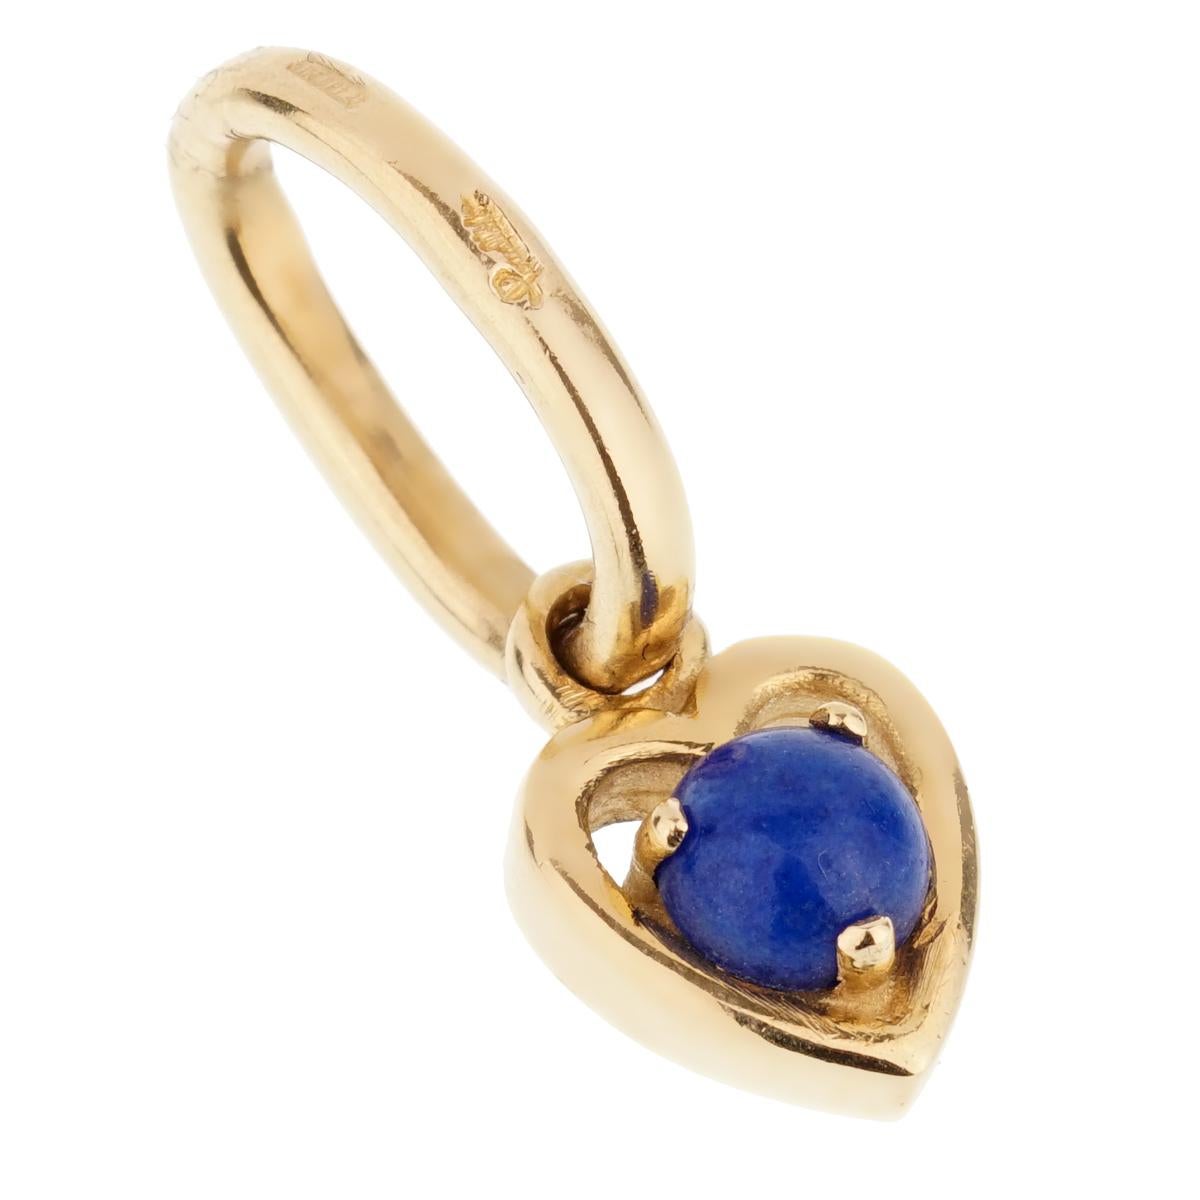 A chic brand new Pomellato charm pendant featuring a .30ct lapis set in 18k yellow gold. 

Sku: 2297